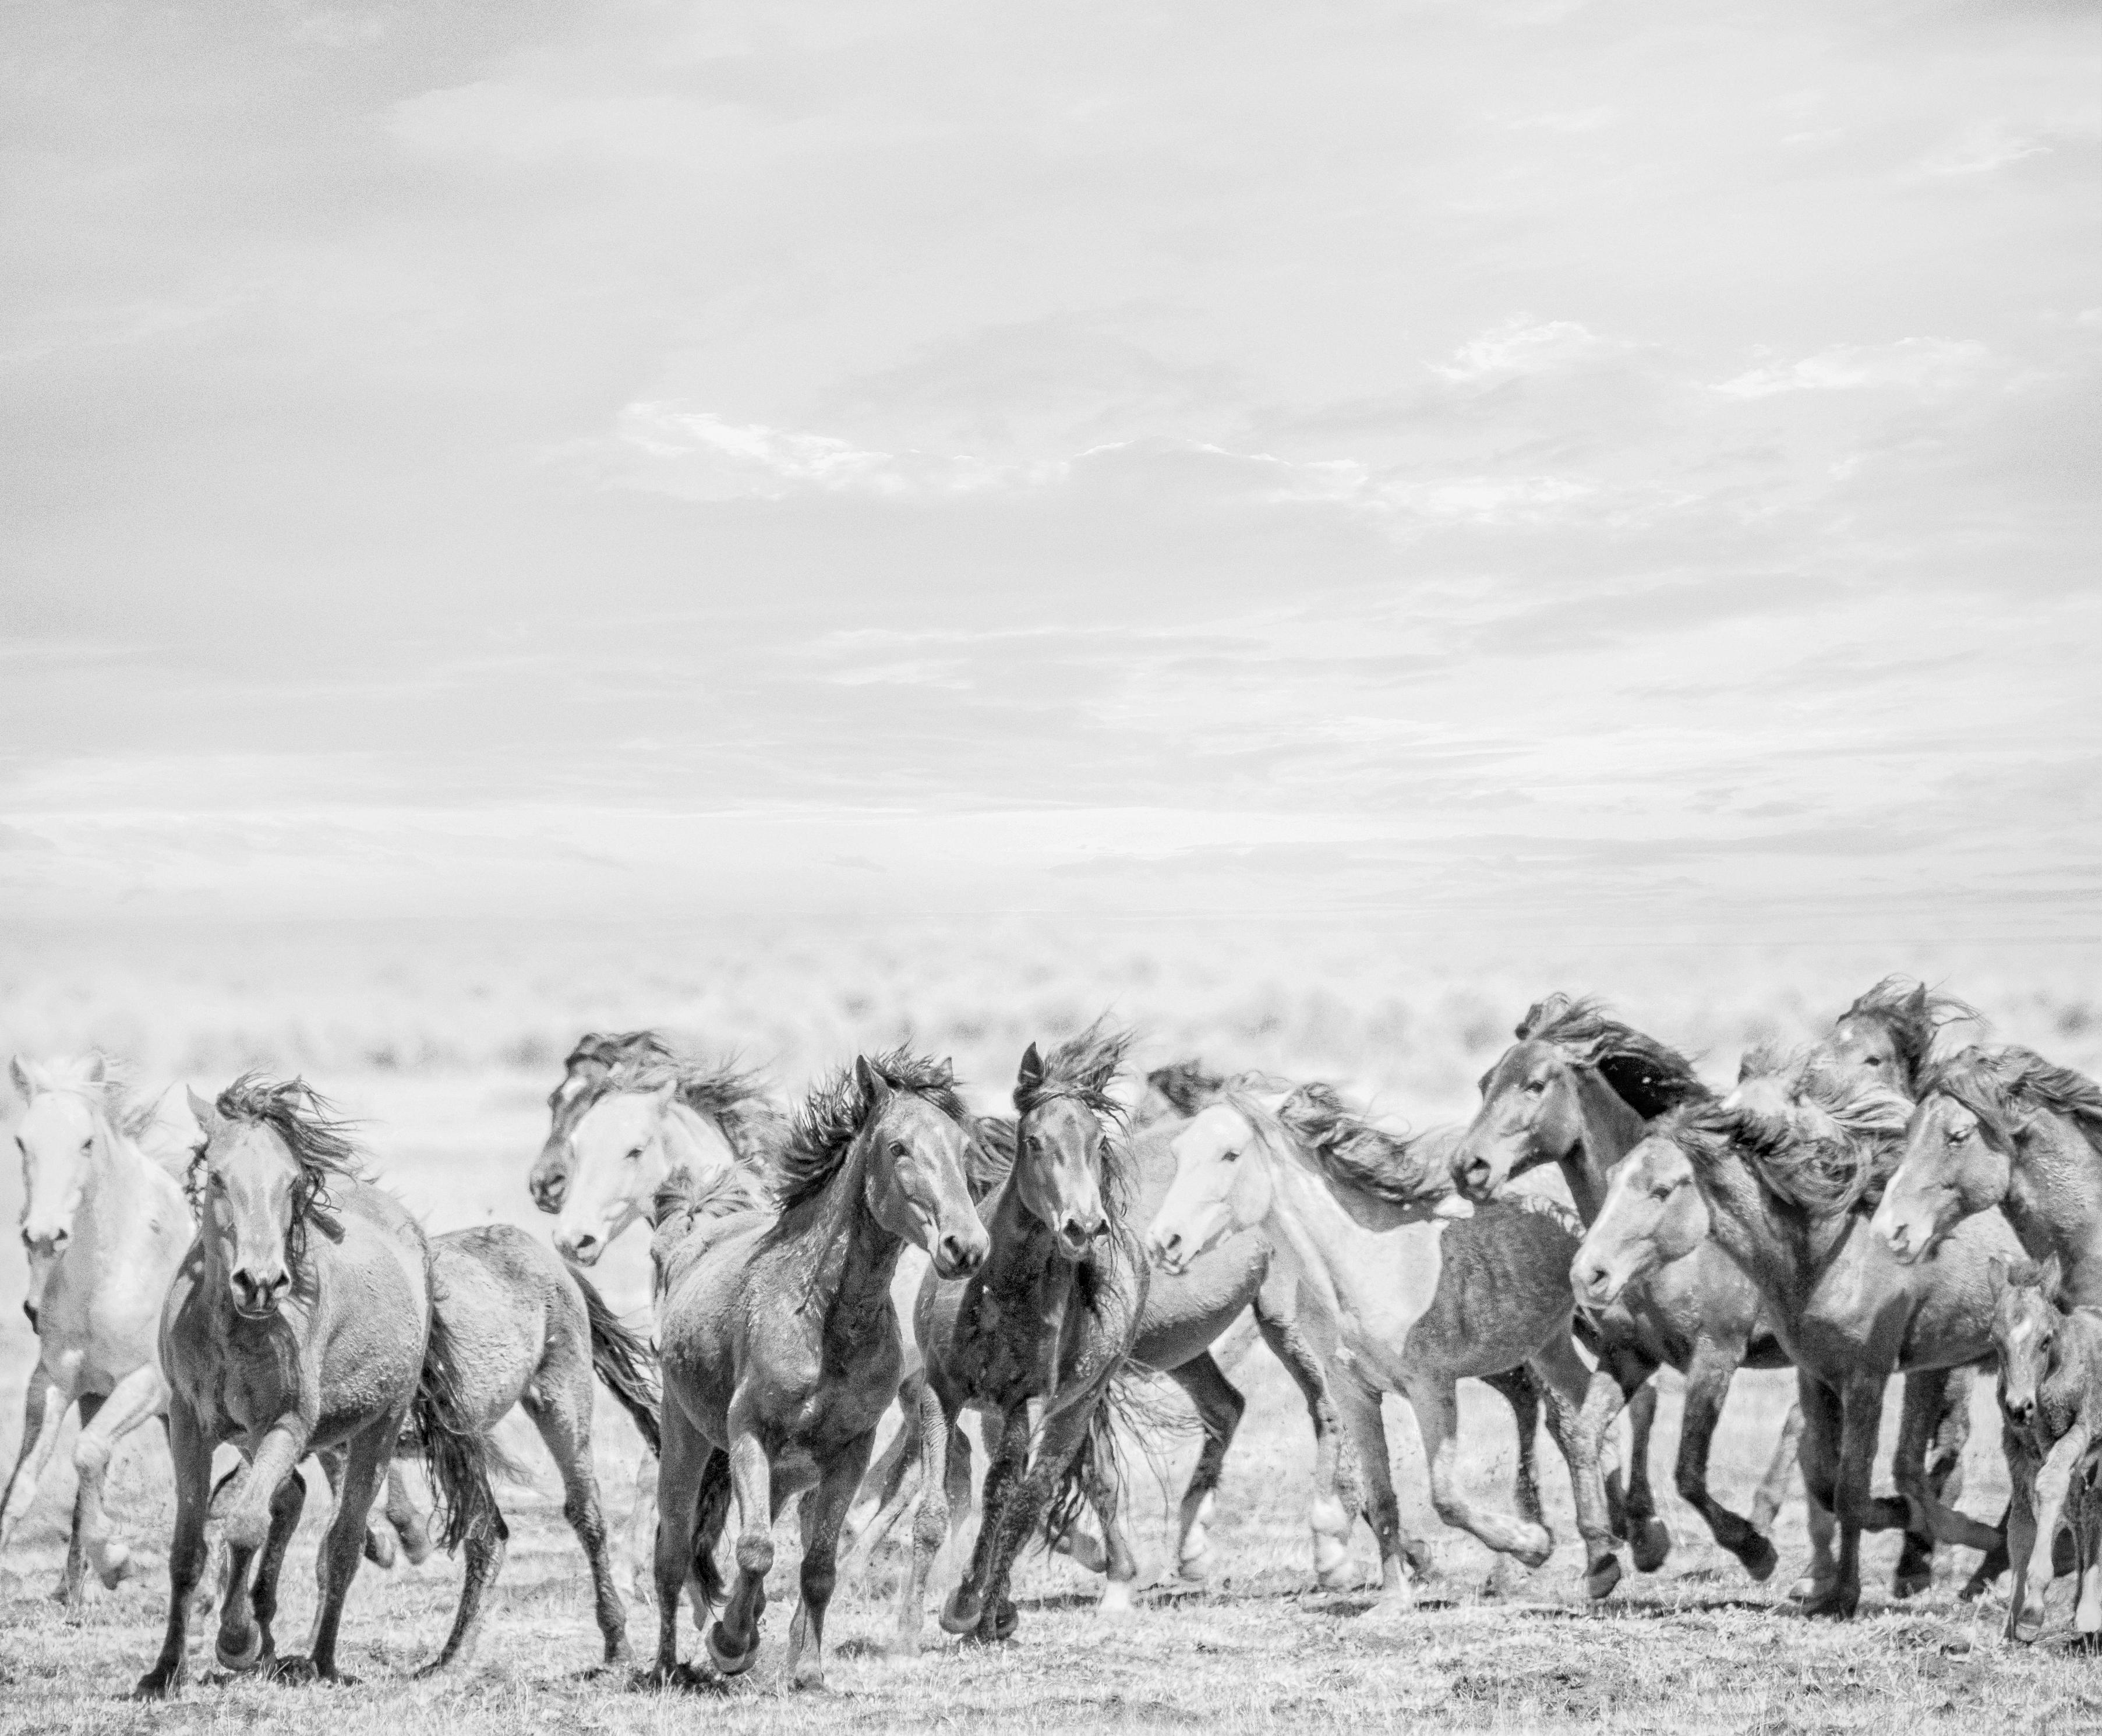 Shane Russeck Black and White Photograph - "Go West"  36x48 - B&W Photography of Wild Horses - Unsigned Test Print